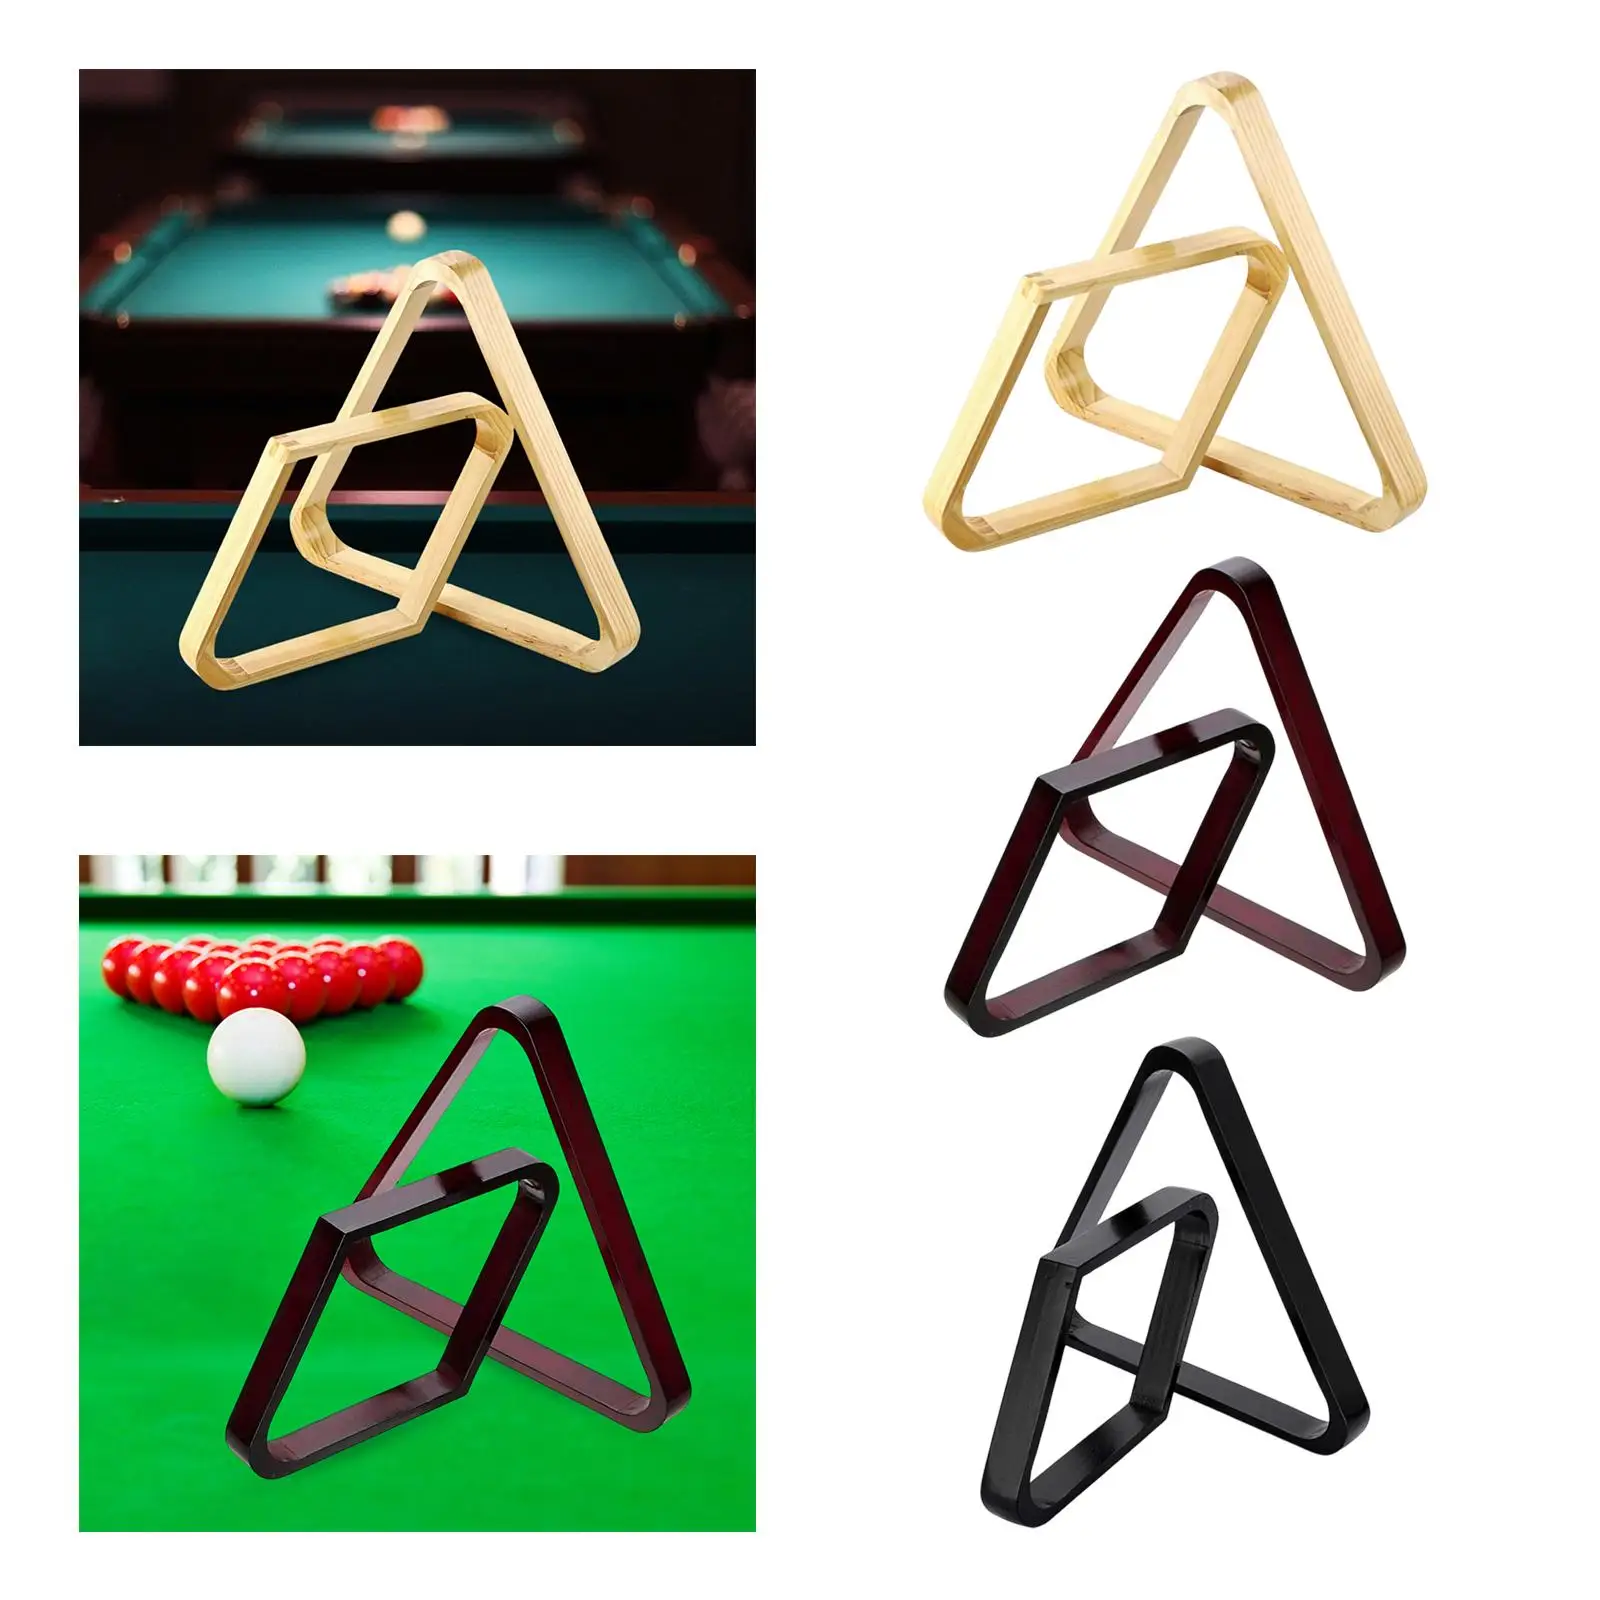 2Pcs Wooden Billiard Ball Rack Set eight ball Triangle Rack Diamond Solid Ball Holder for Supplies Accessories Pool Table Game